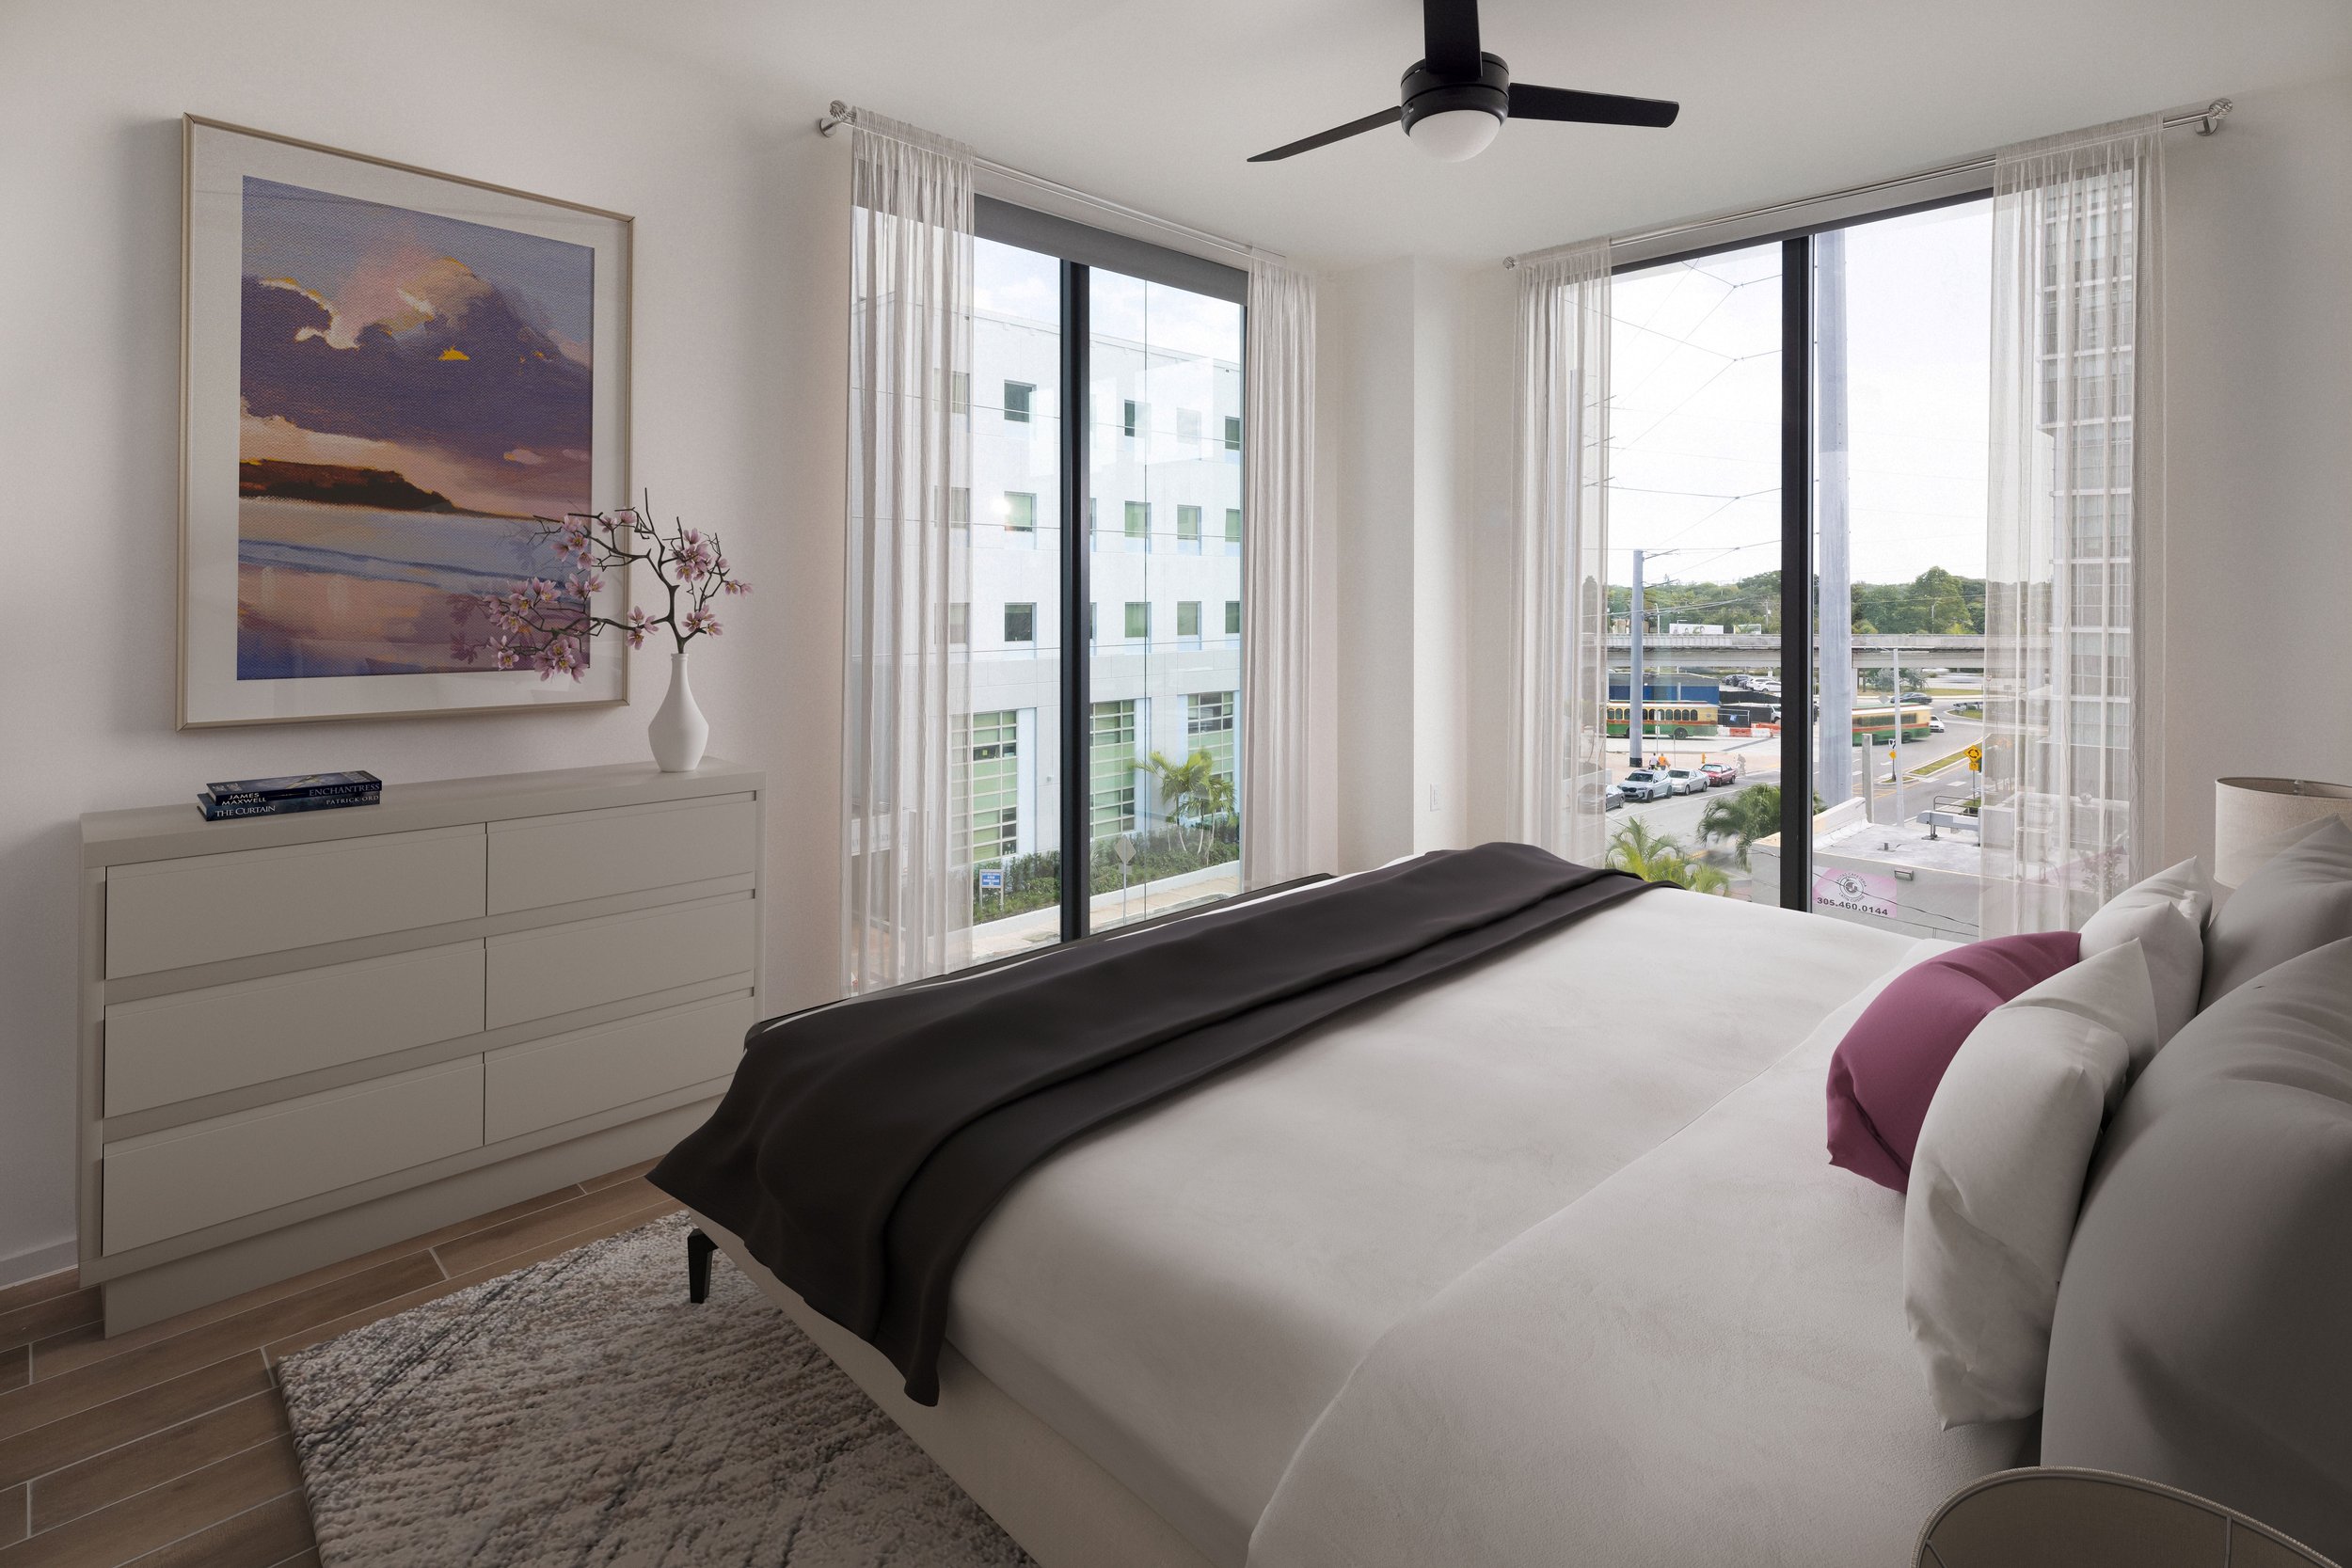 Mast Capital Delivers Avalon Merrick Park Coral Gables Multifamily In Partnership with AvalonBay Communities 9.jpg